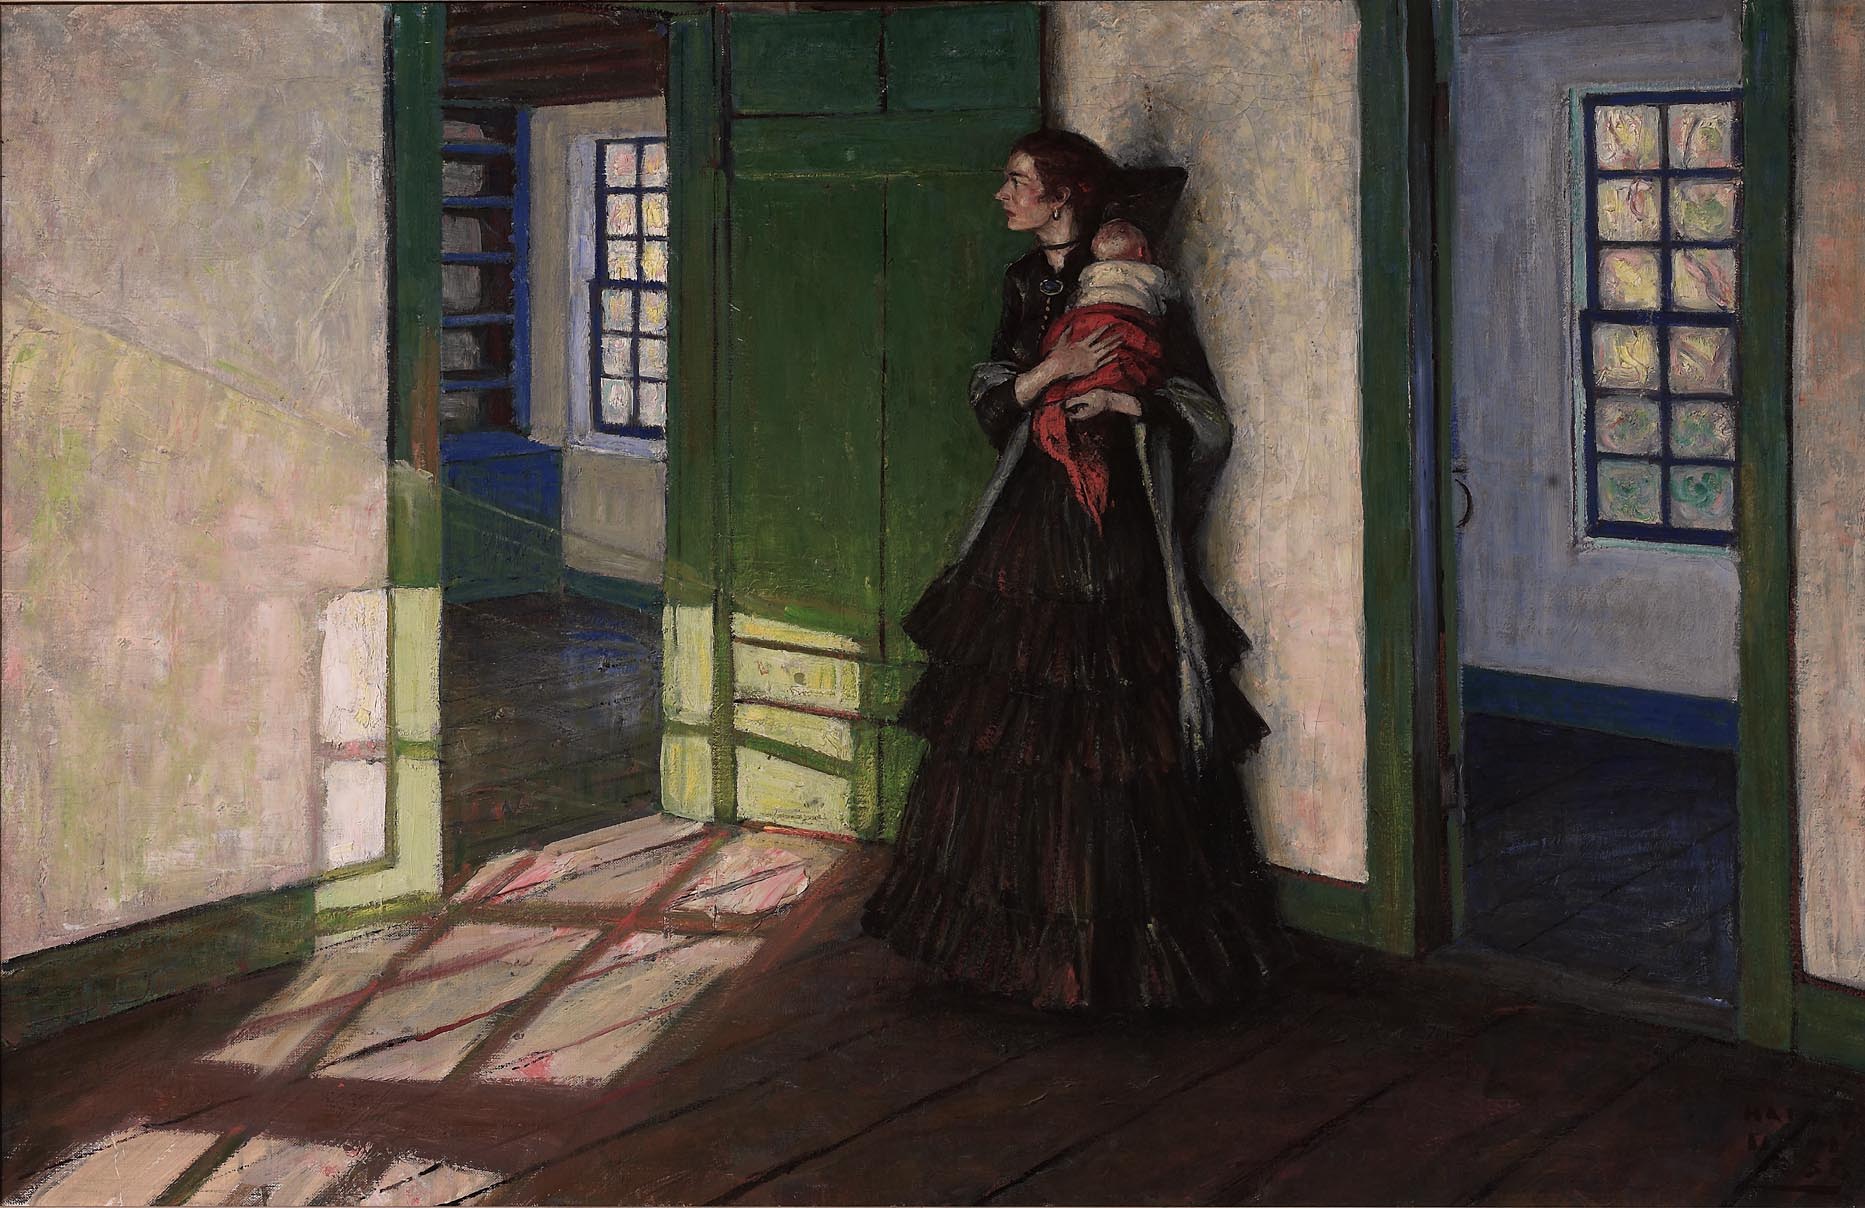 A woman in an empty house wearing a dark dress clutching a baby to her shoulder.